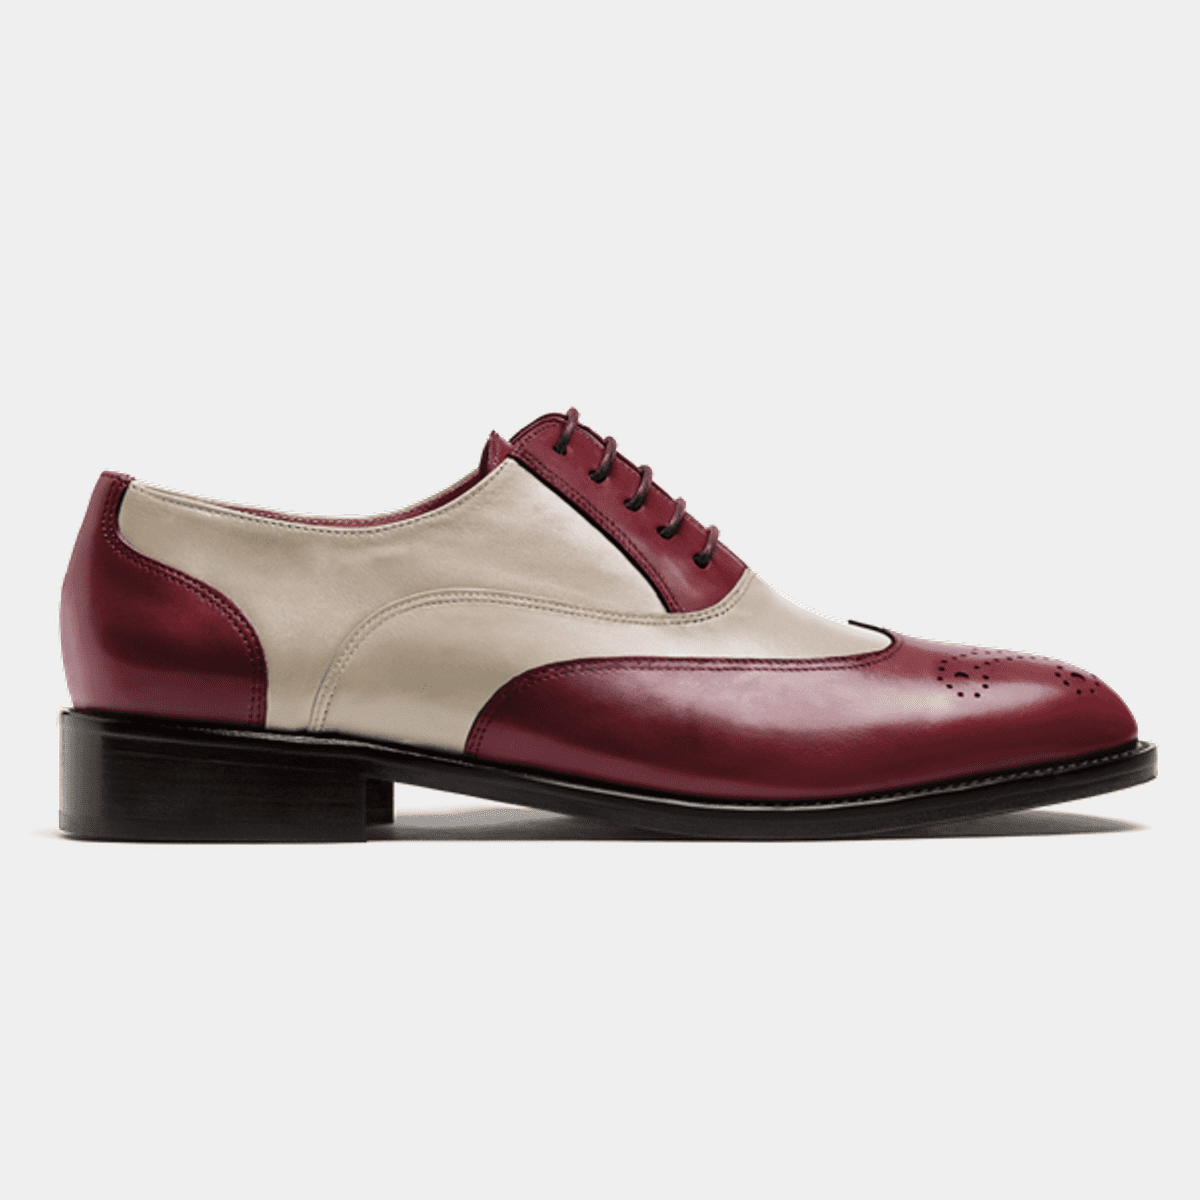 Spectator shoes - oxblood & white leather